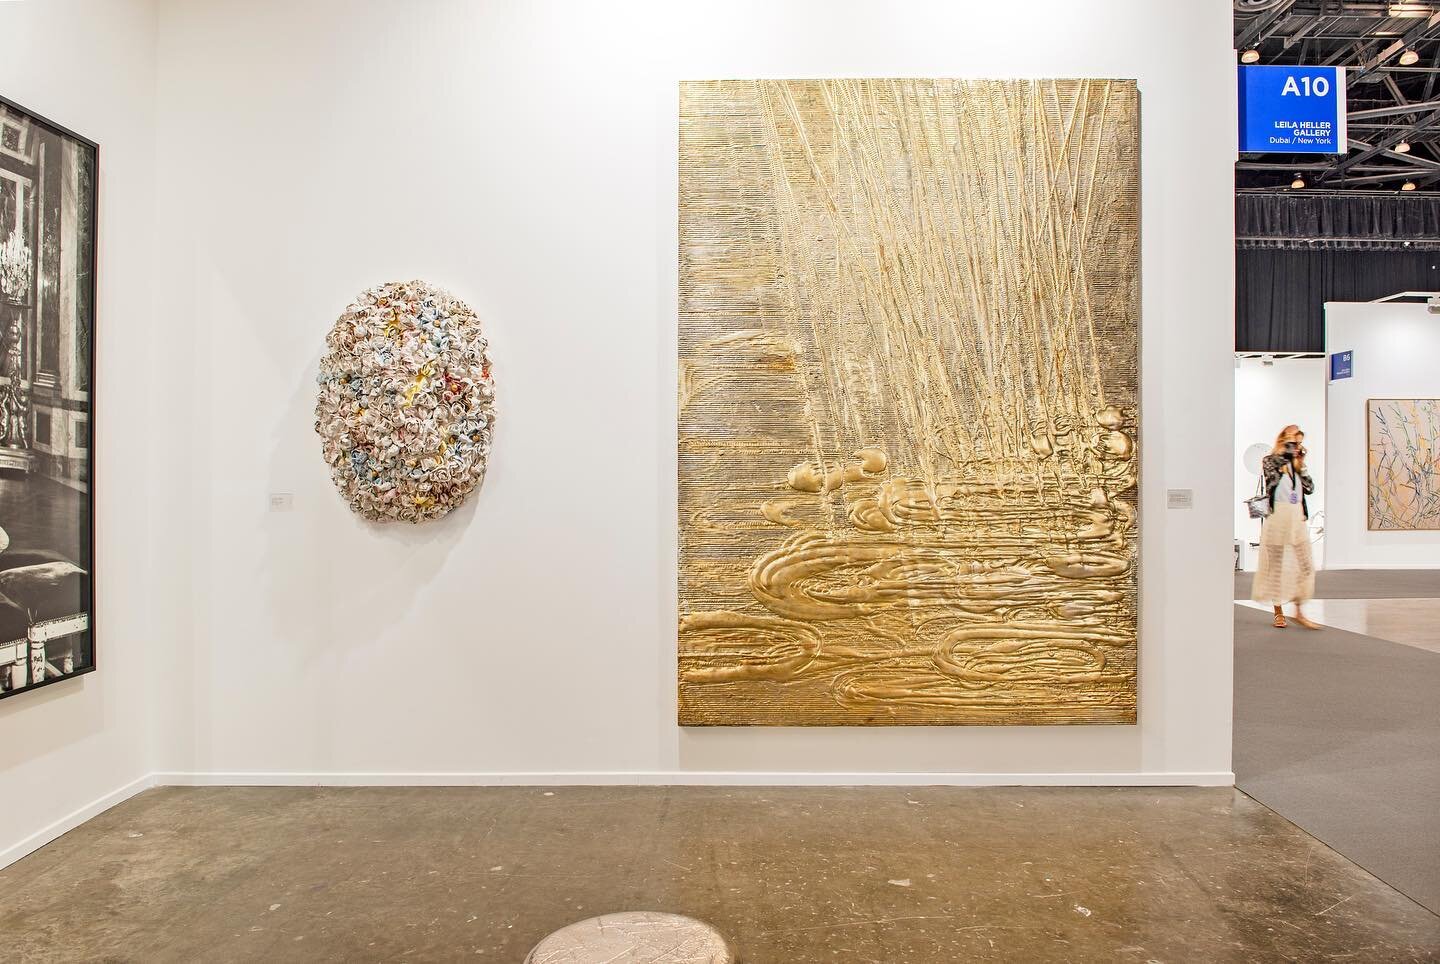 Throwback to shooting @leilahellergallery &rsquo;s booth at @artdubai 2019.

Artworks in this photo:
@nancylorenzstudio . Moon Gold Mountain, 2018. Moon gold leaf, clay and cardboard on wood panel. 260 x 183 cm. + Gold Grass and Resin Drop Screen, 20